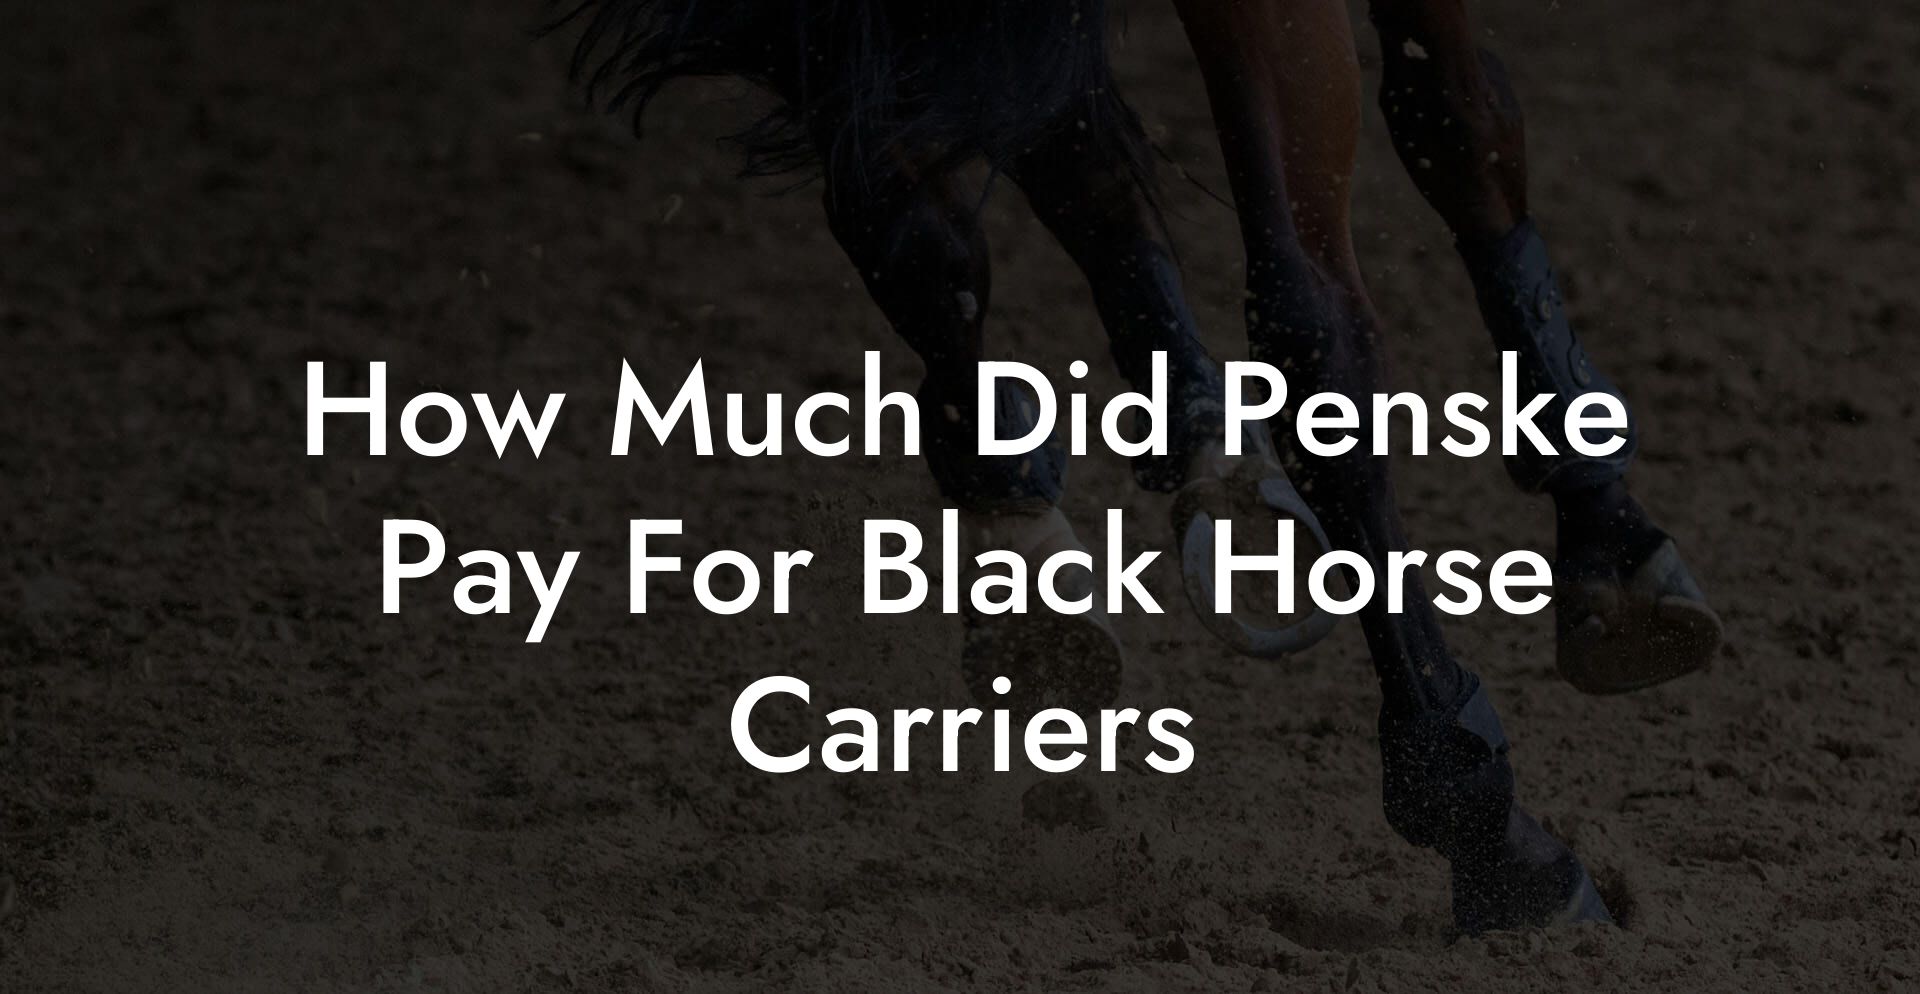 How Much Did Penske Pay For Black Horse Carriers